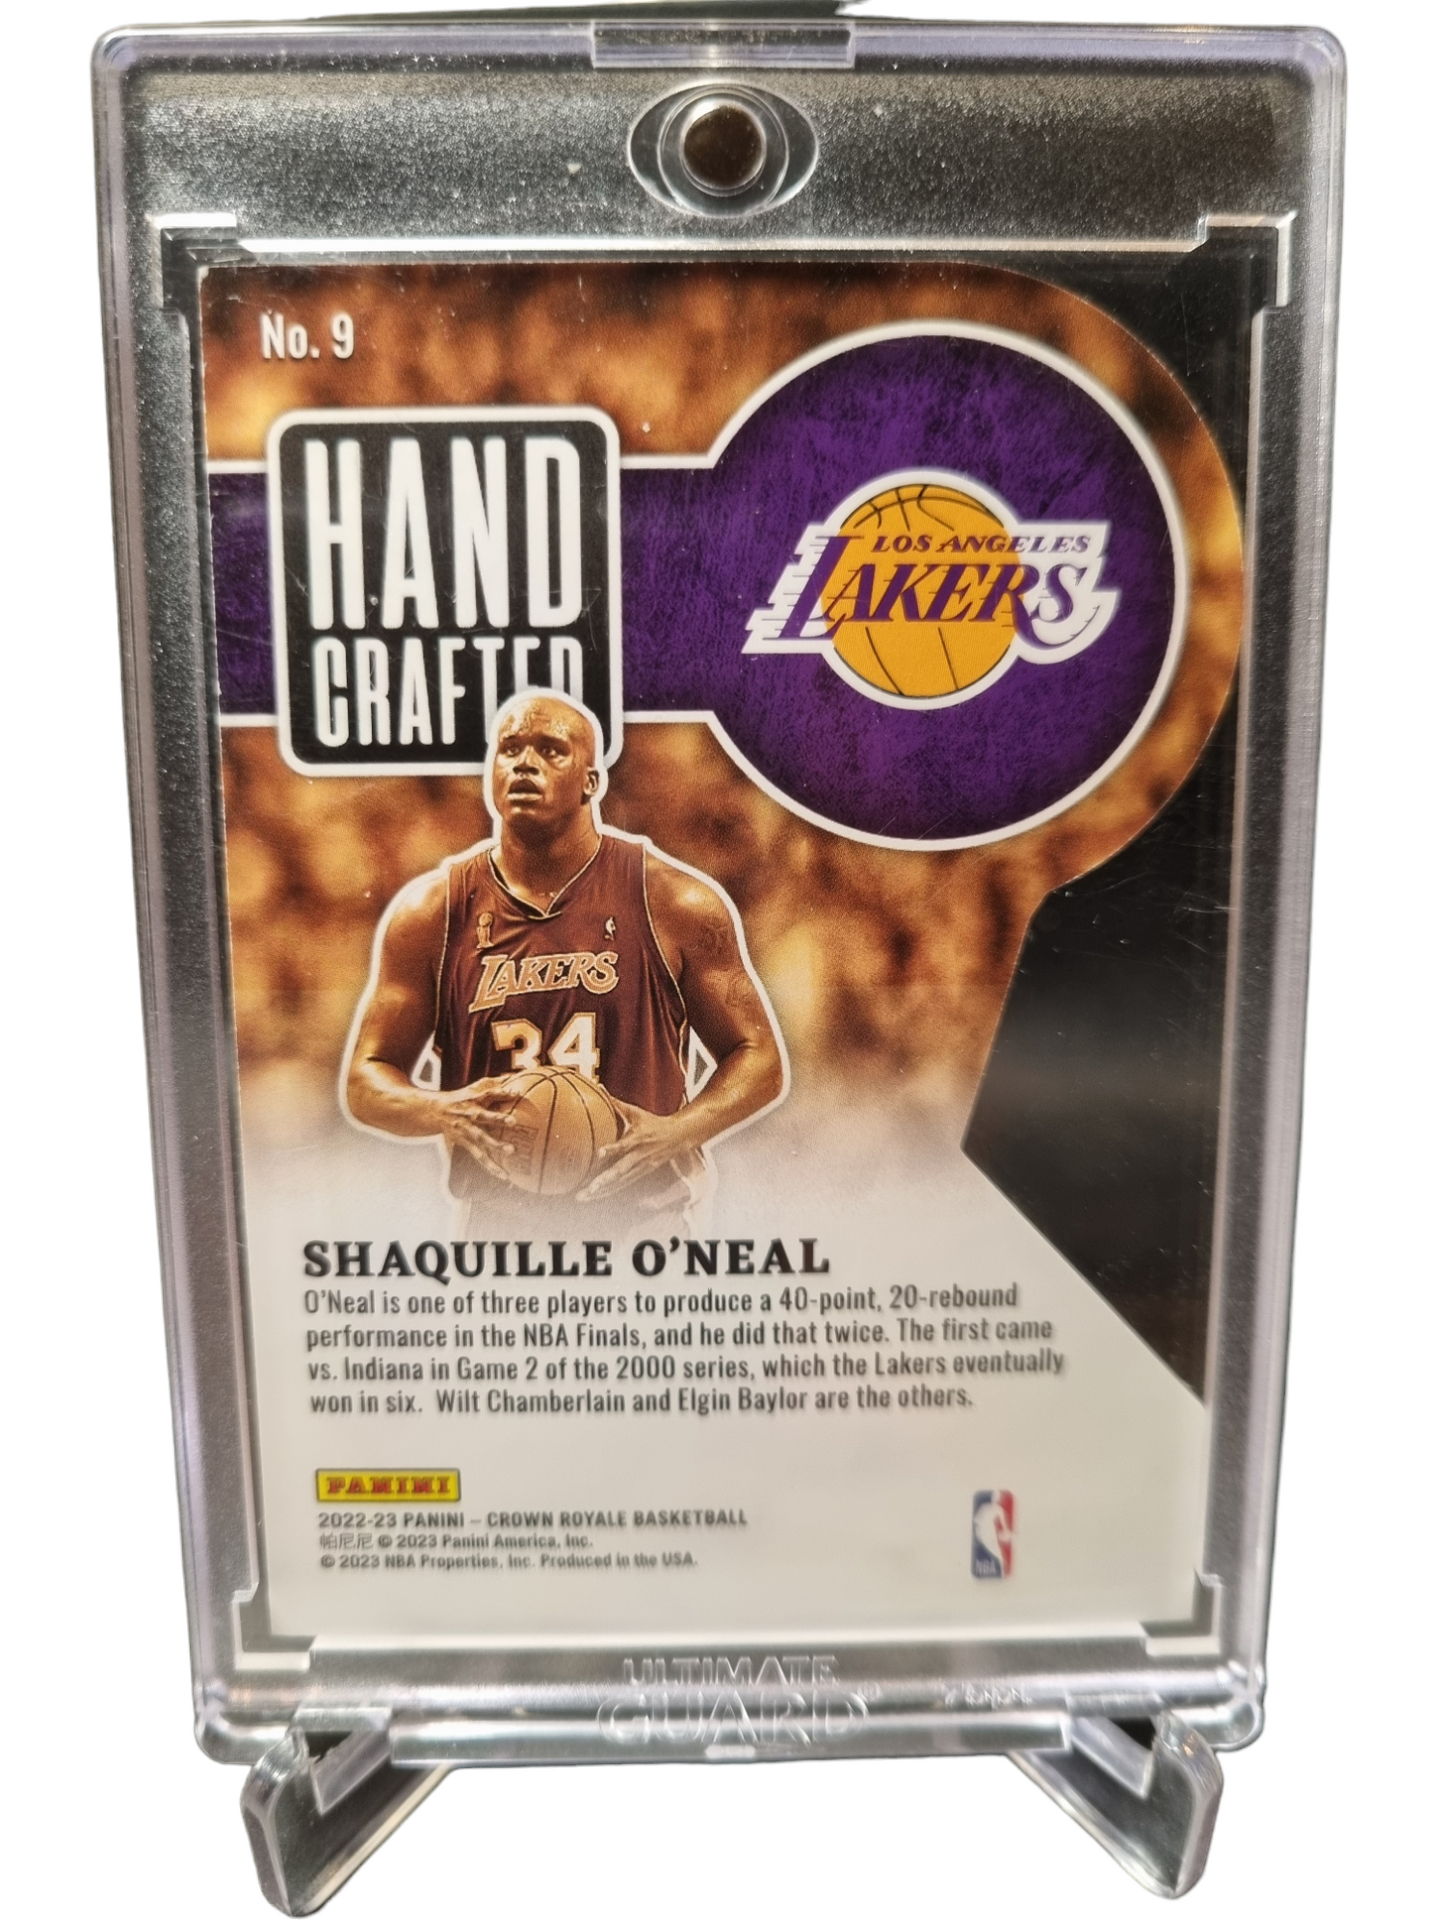 2022-23 Panini Crown Royale #9 Shaquille O'Neal Hand Crafted Die Cut 30/49